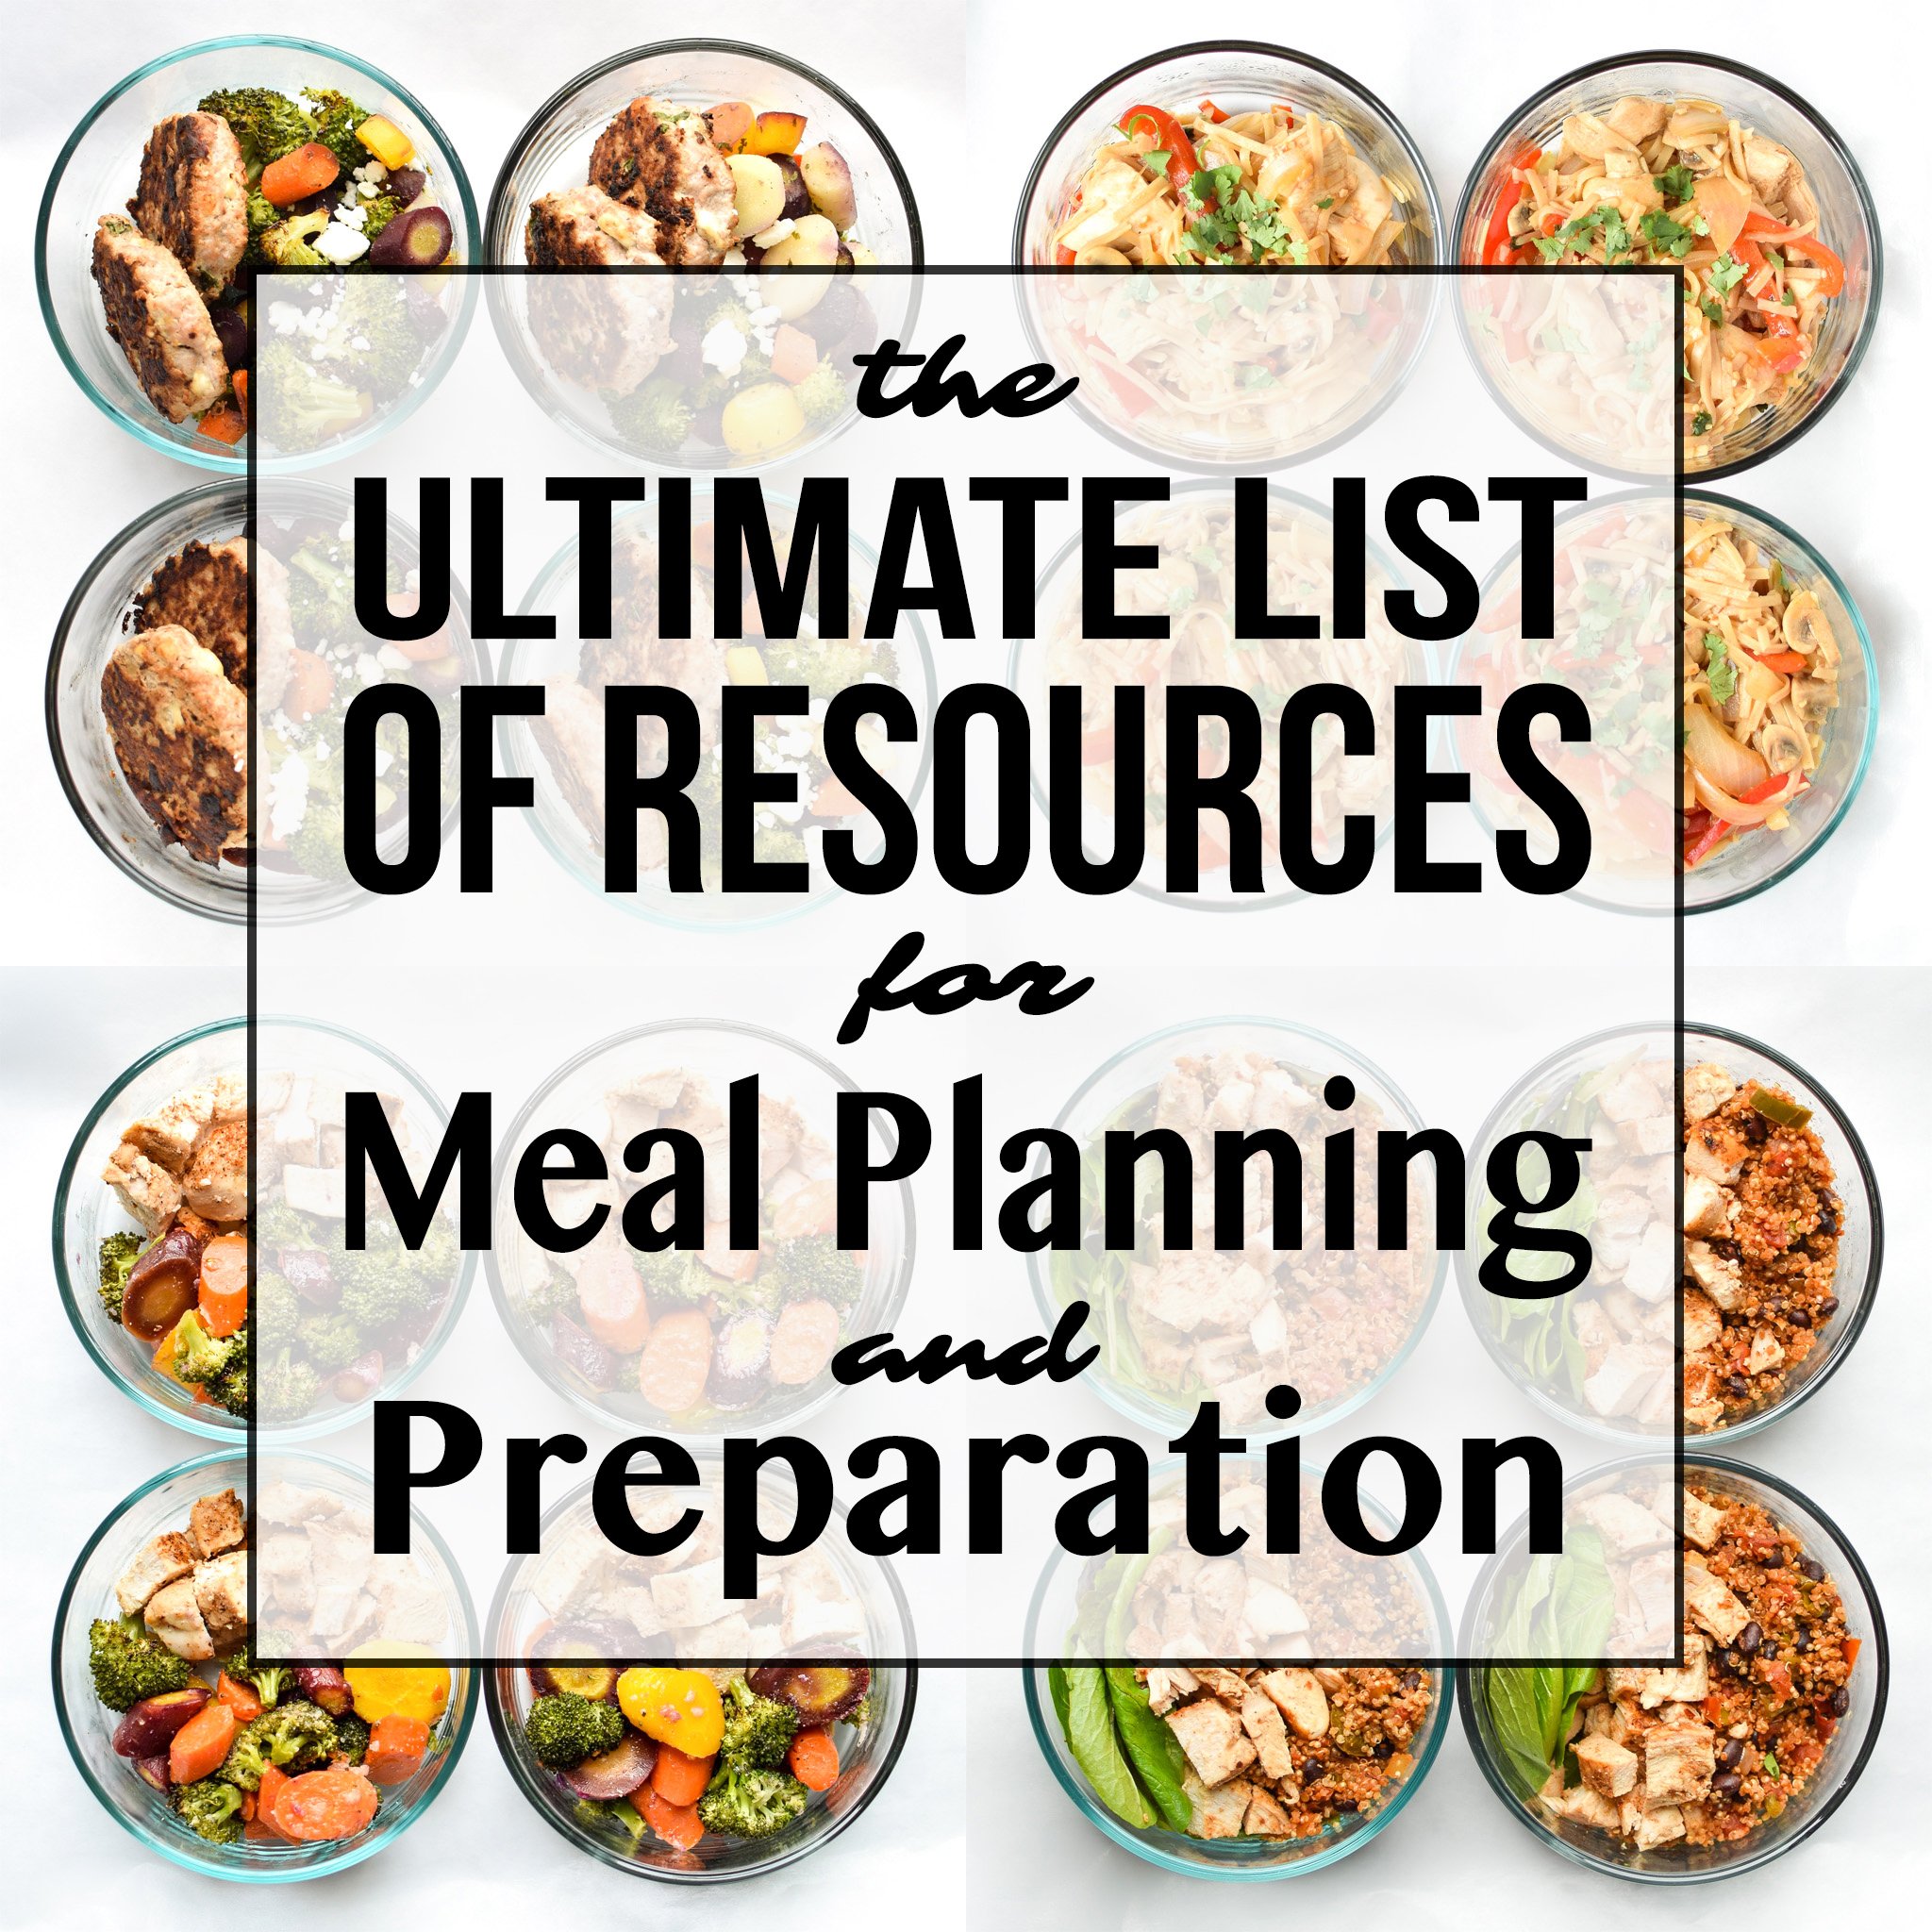 The Ultimate List of Resources for Meal Planning and Prep - References, meal prep tips, How-To's, and recipe inspiration for your meal prep and planning! - ProjectMealPlan.com